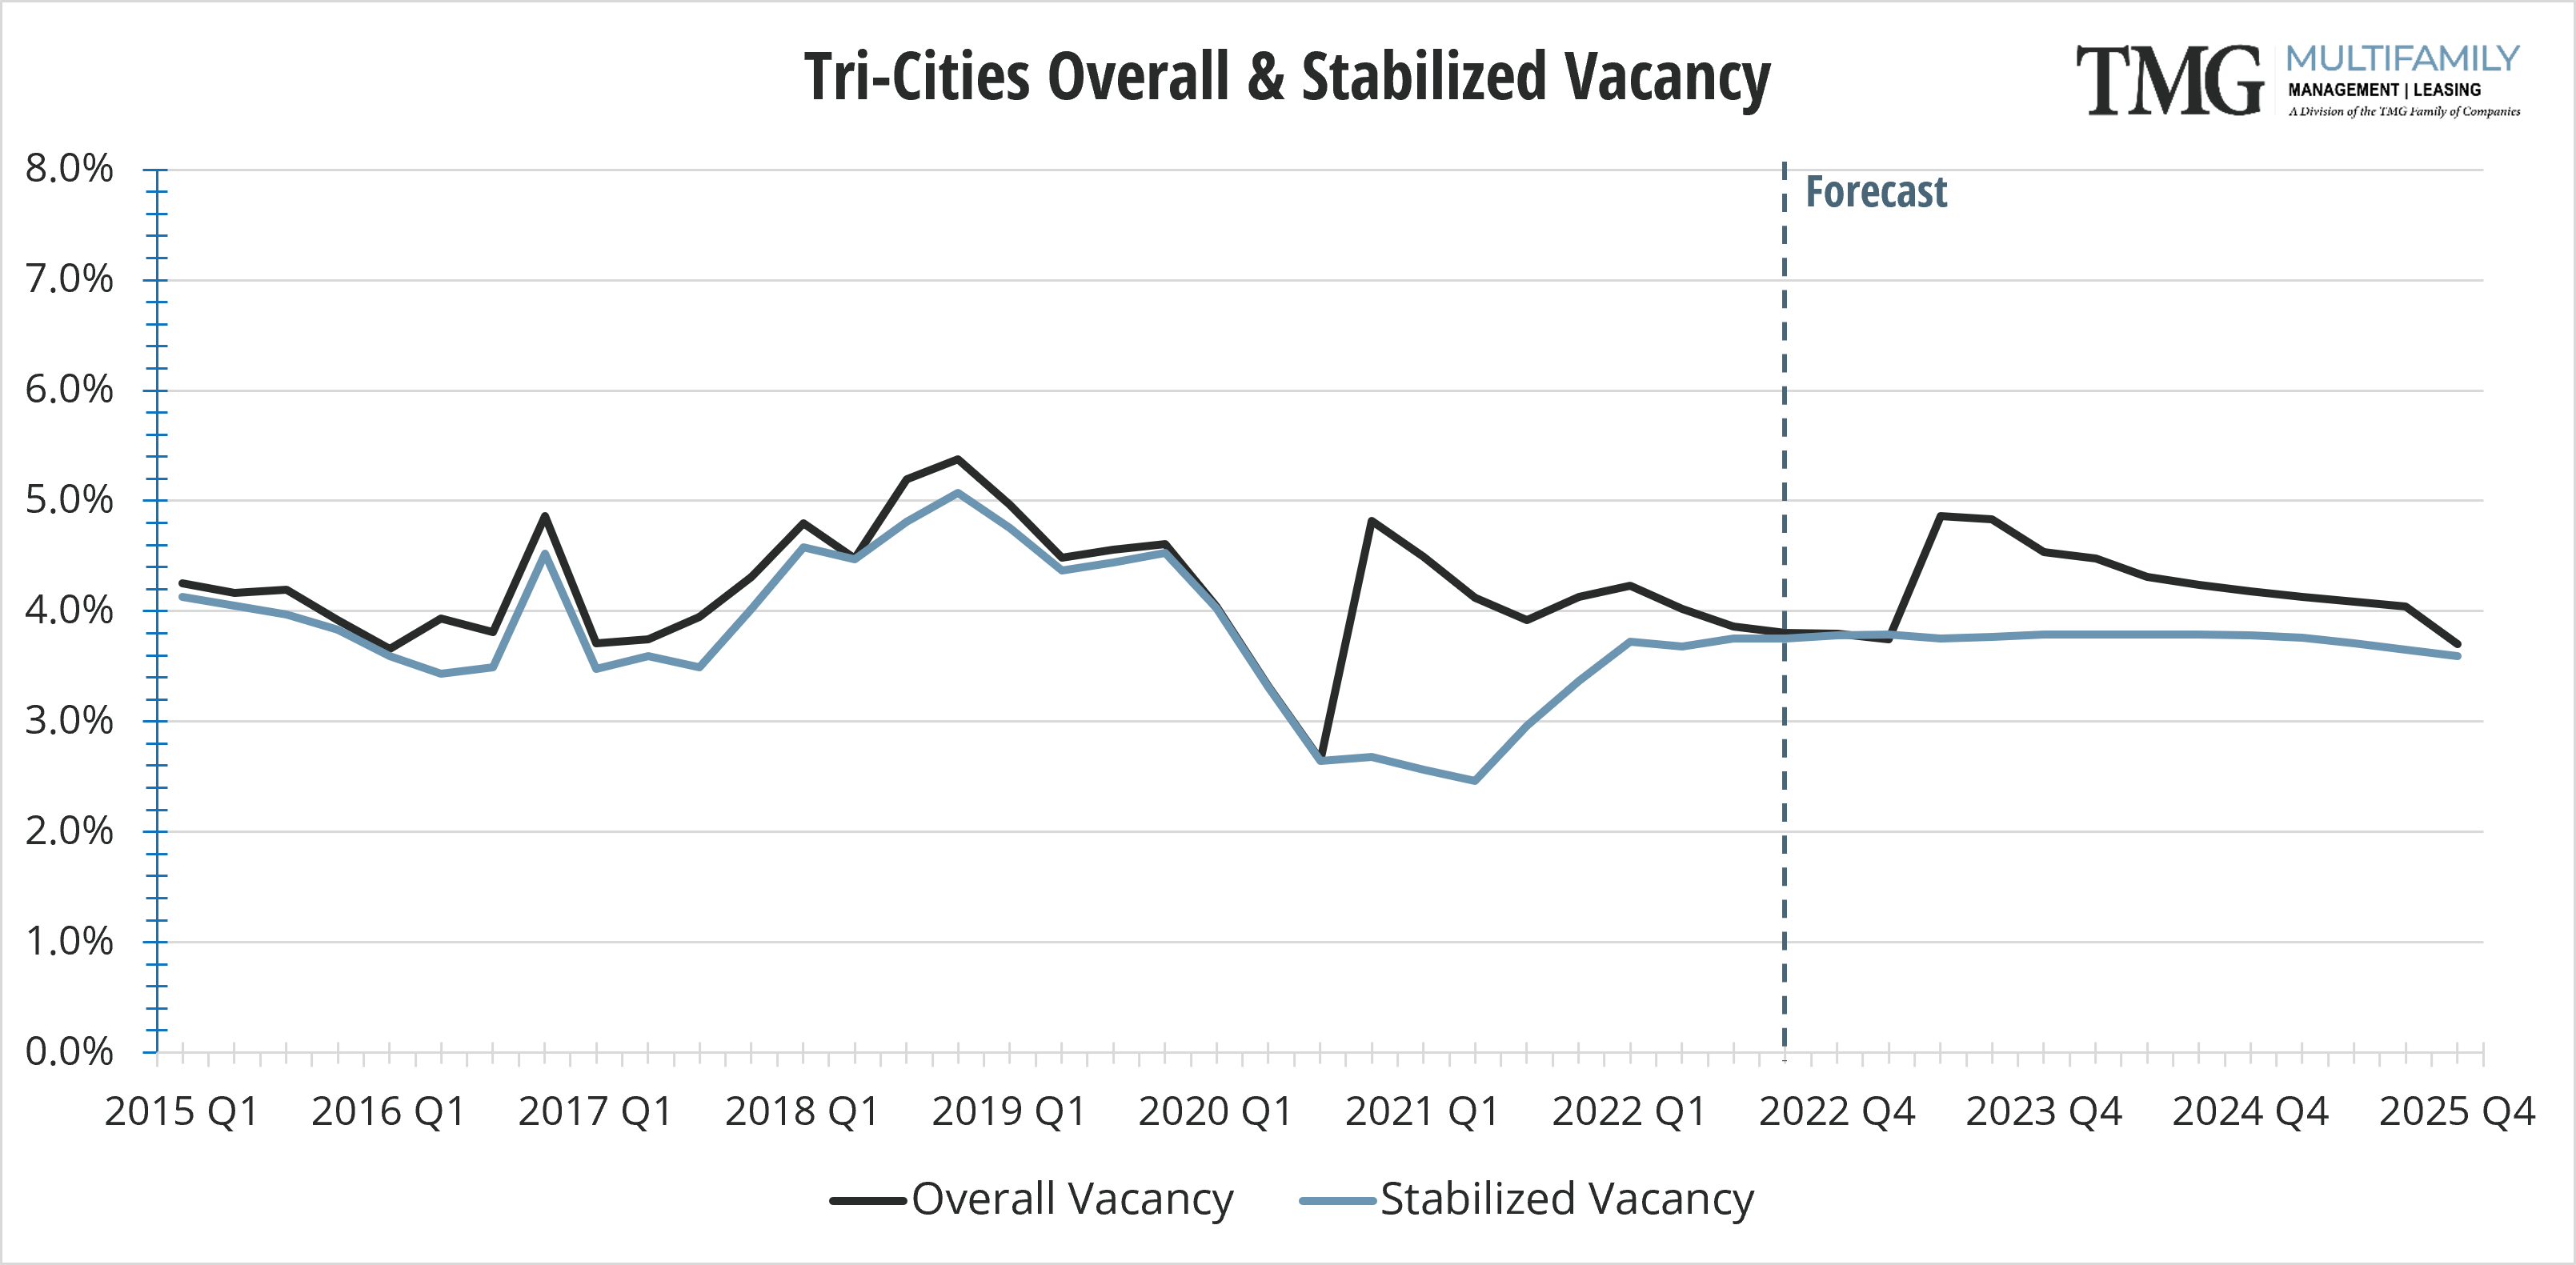 Tri-Cities Overall & Stabilized Vacancy